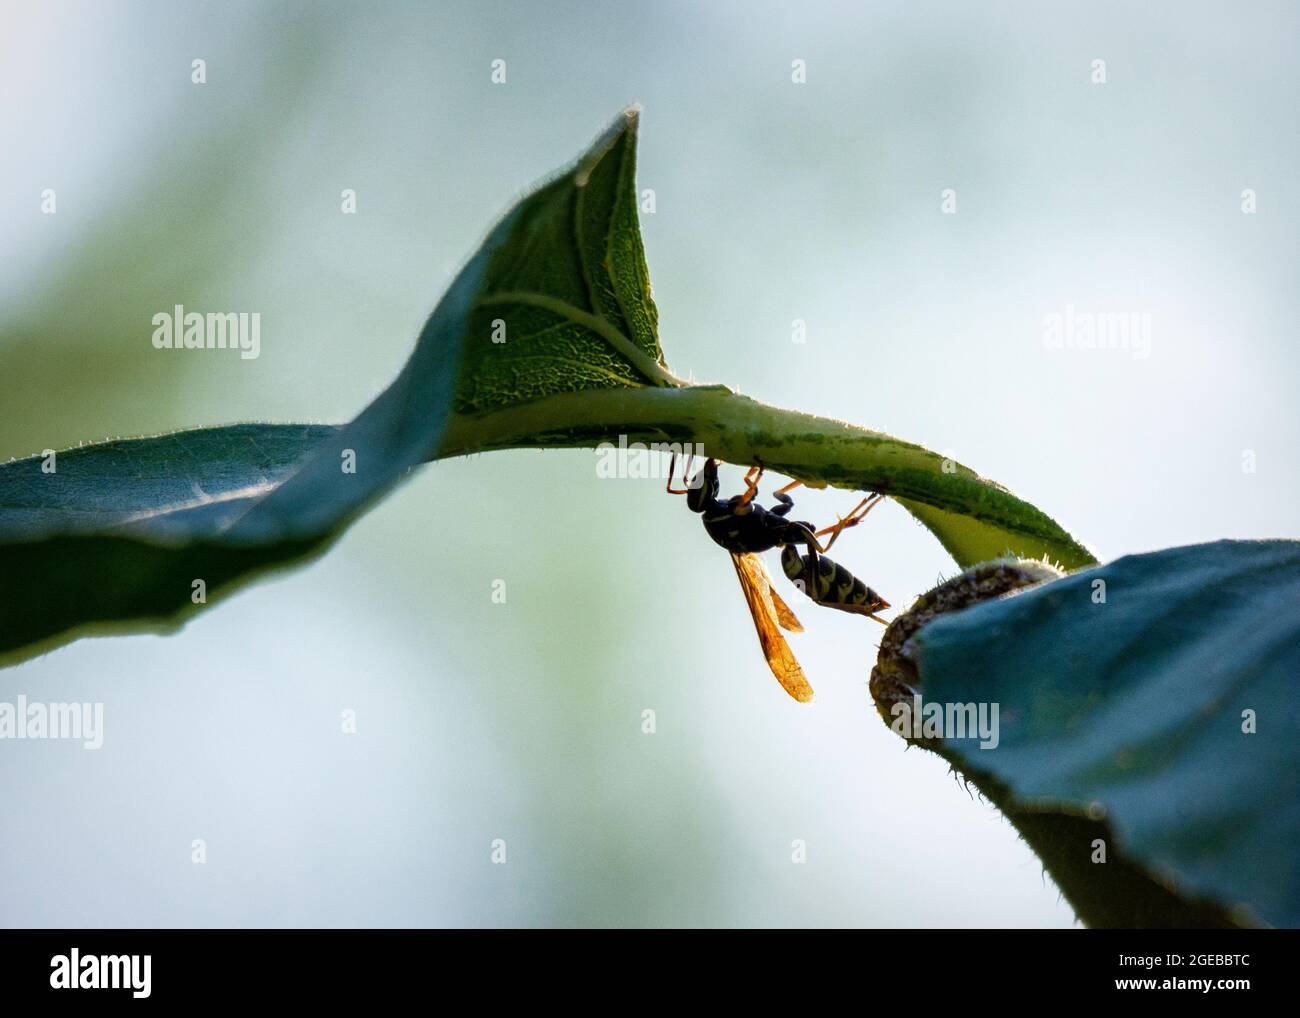 A Yellow Jacket wasp walks up and down a sunflower stalk in an August evening light. Stock Photo